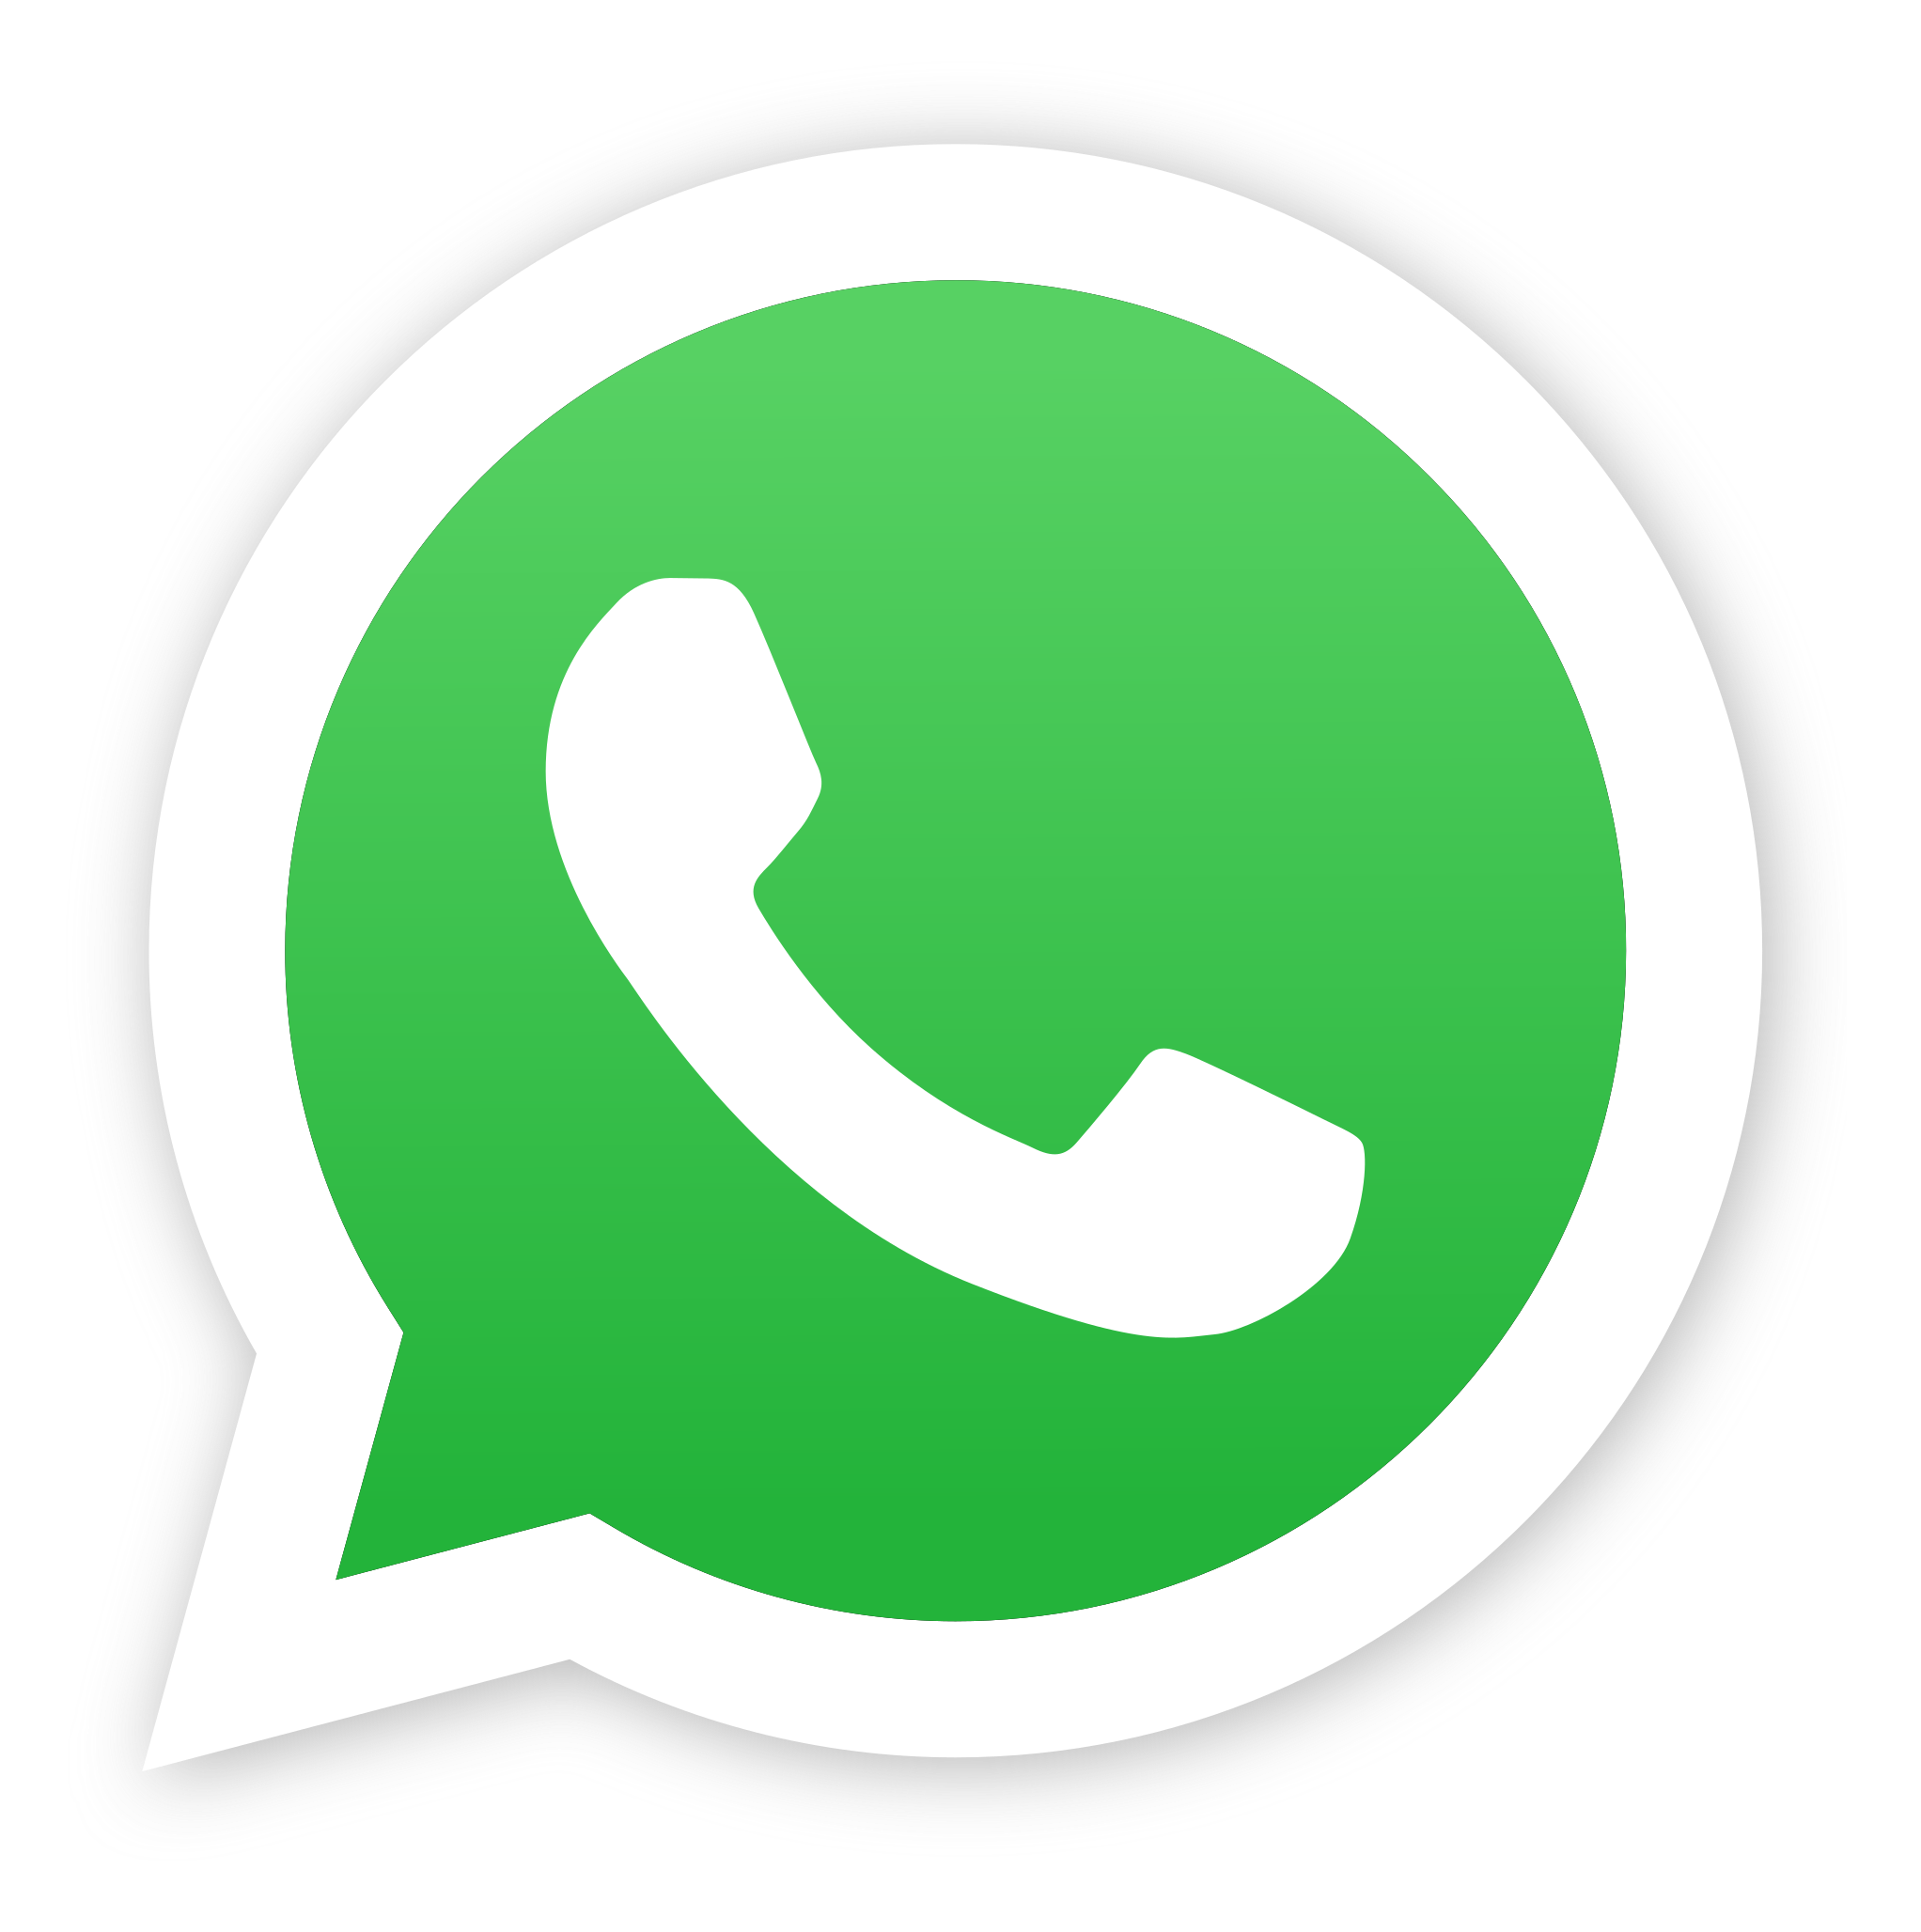 Whatsapp logo with green background